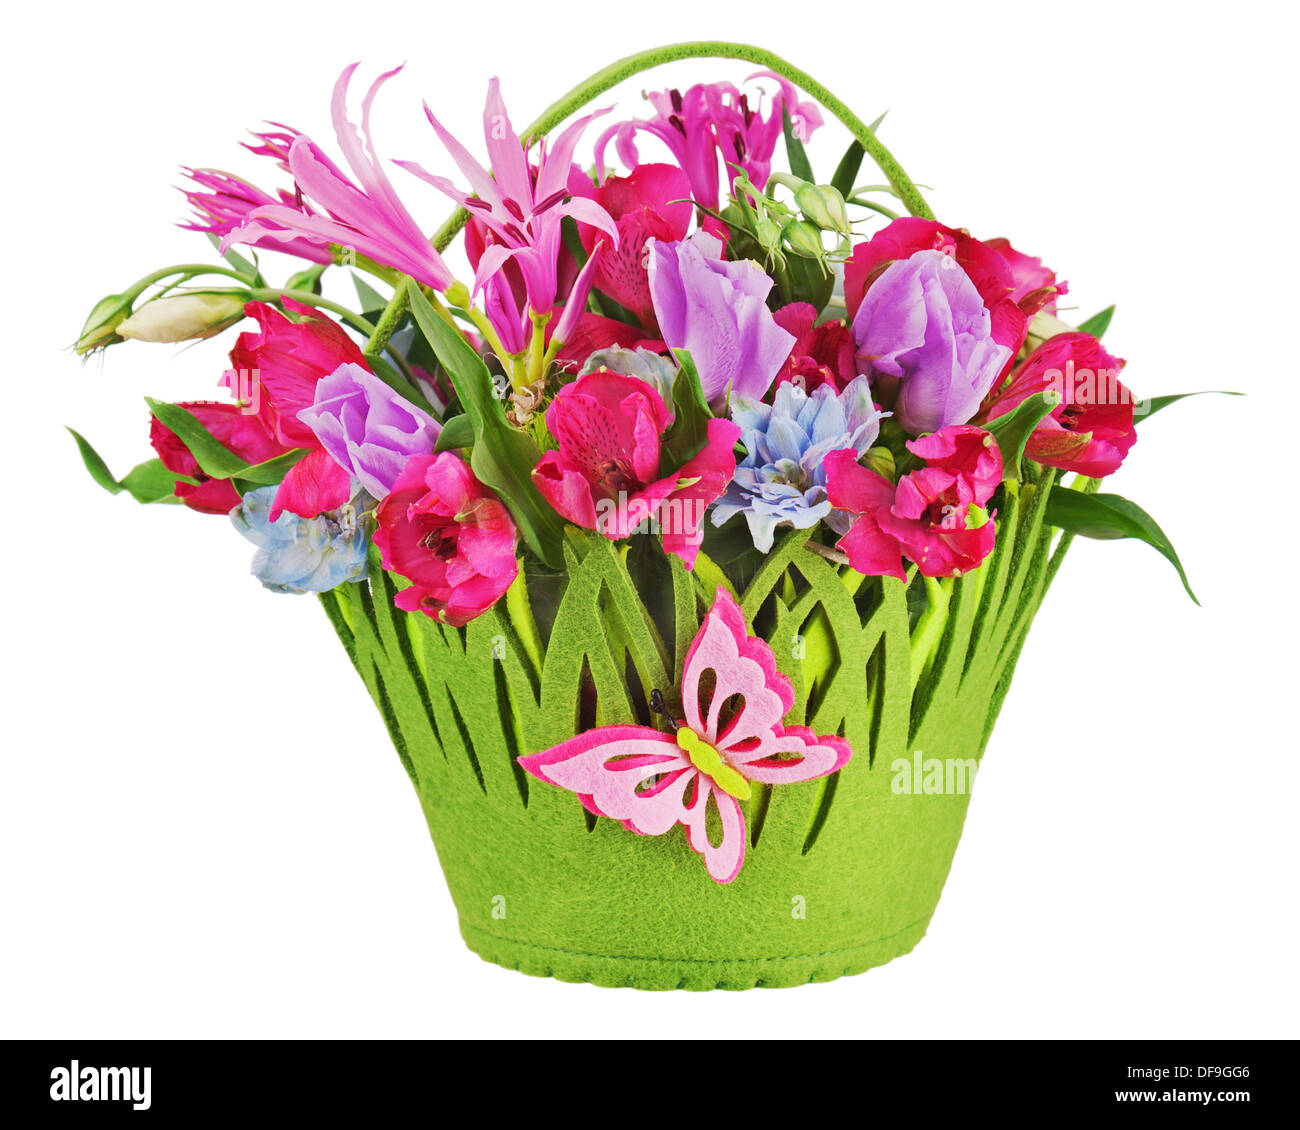 Colorful flower bouquet arrangement centerpiece in baby basket isolated on white background. Closeup. Stock Photo